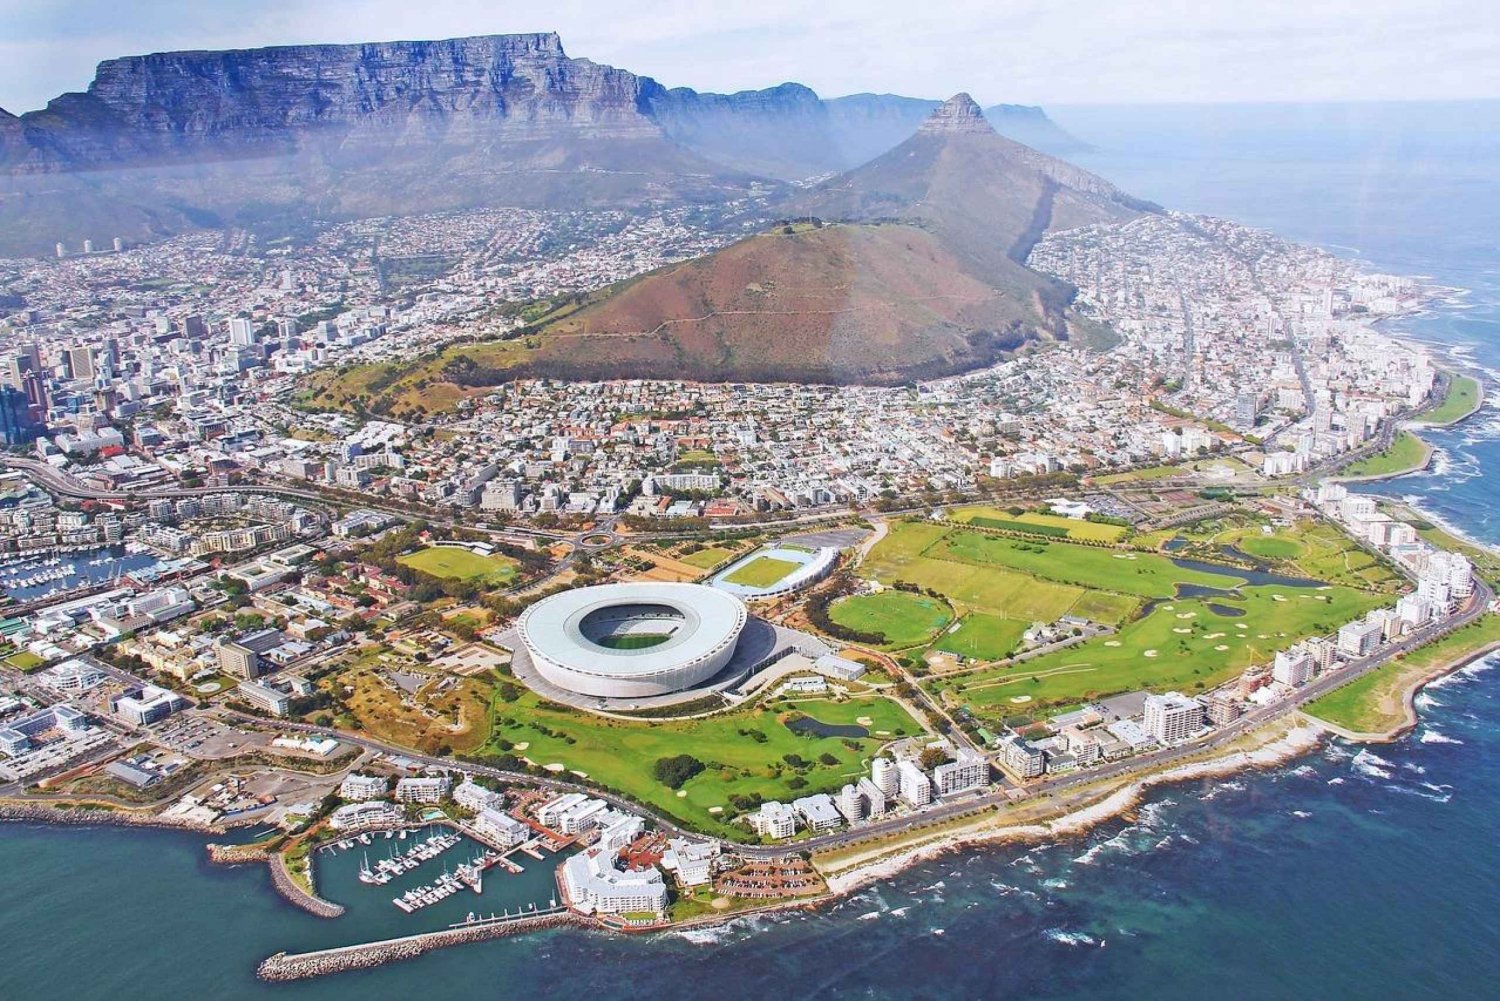 Cape Town: Table Mountain, Green Market Square & Township